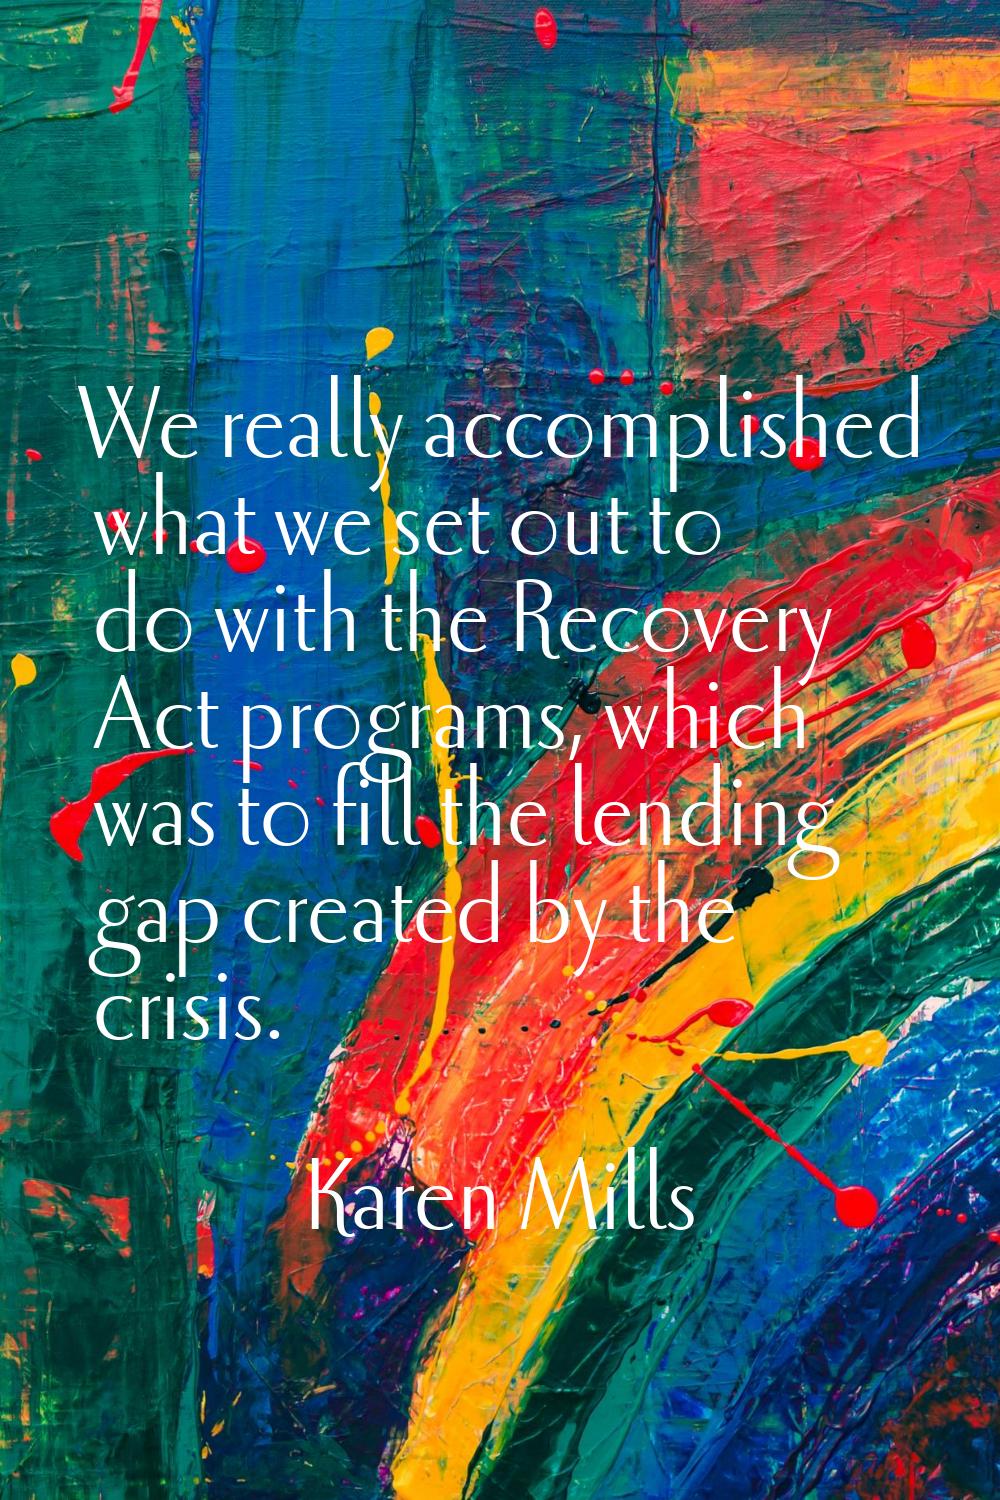 We really accomplished what we set out to do with the Recovery Act programs, which was to fill the 